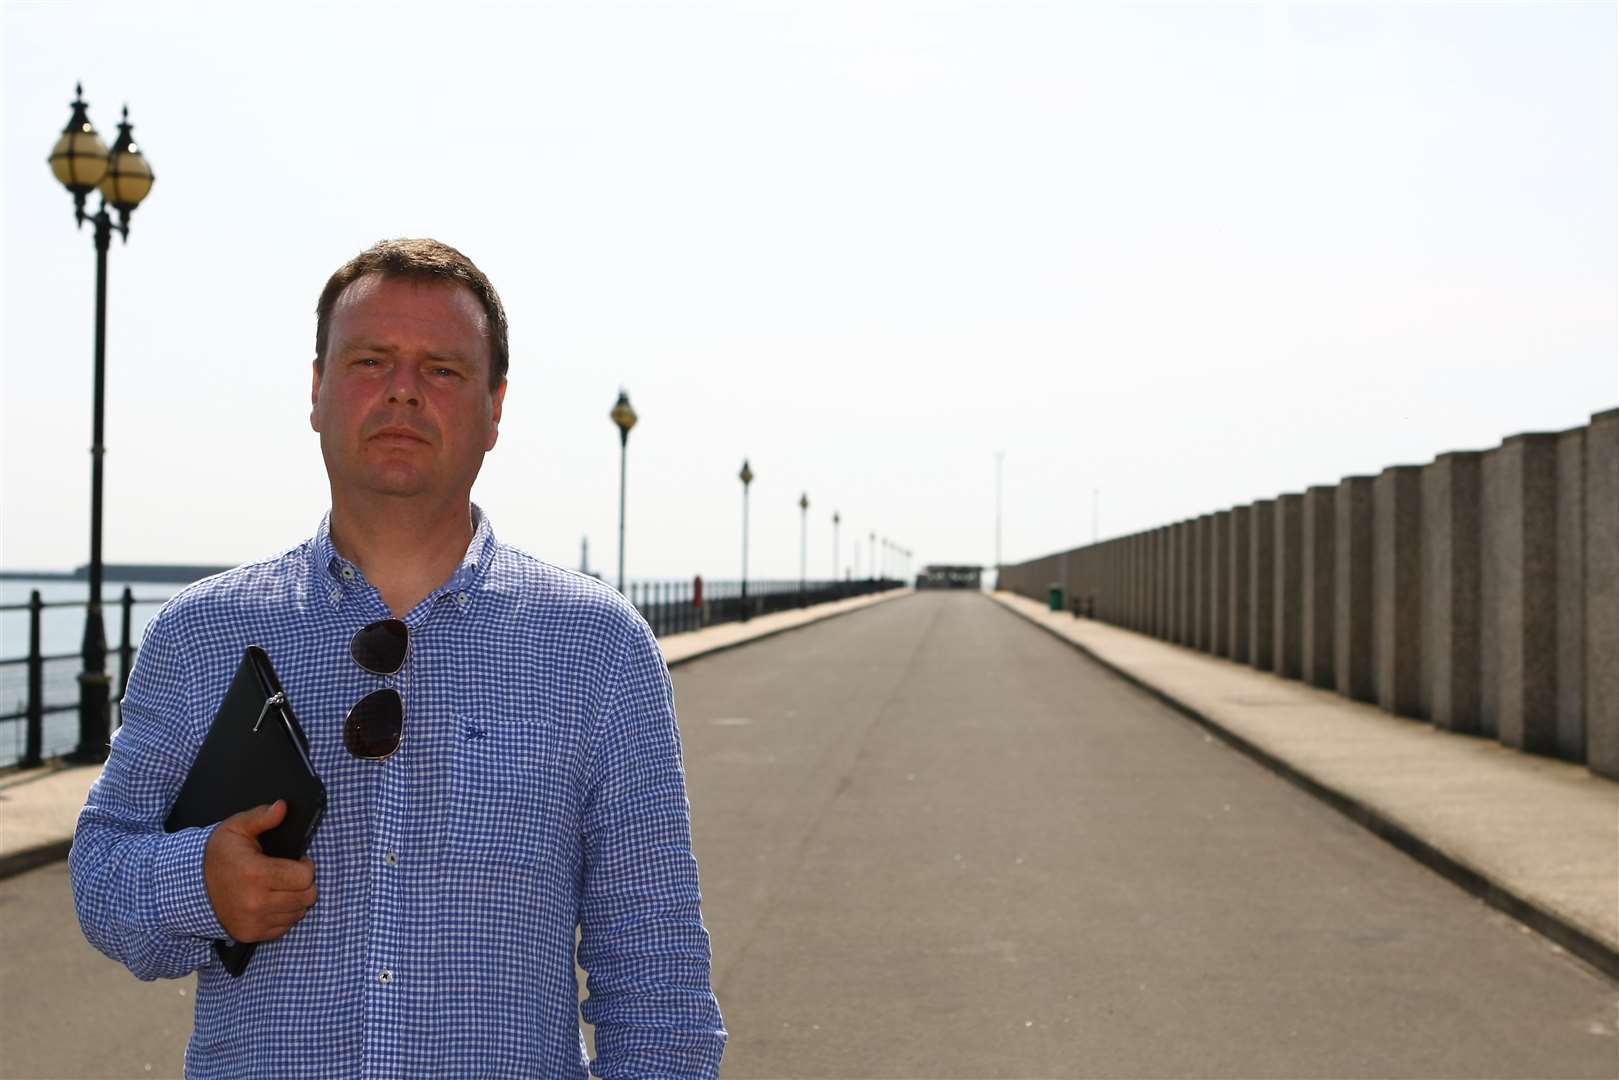 Cllr John Heron fears Dover Harbour Board will stop public access to the pier indefinitely.